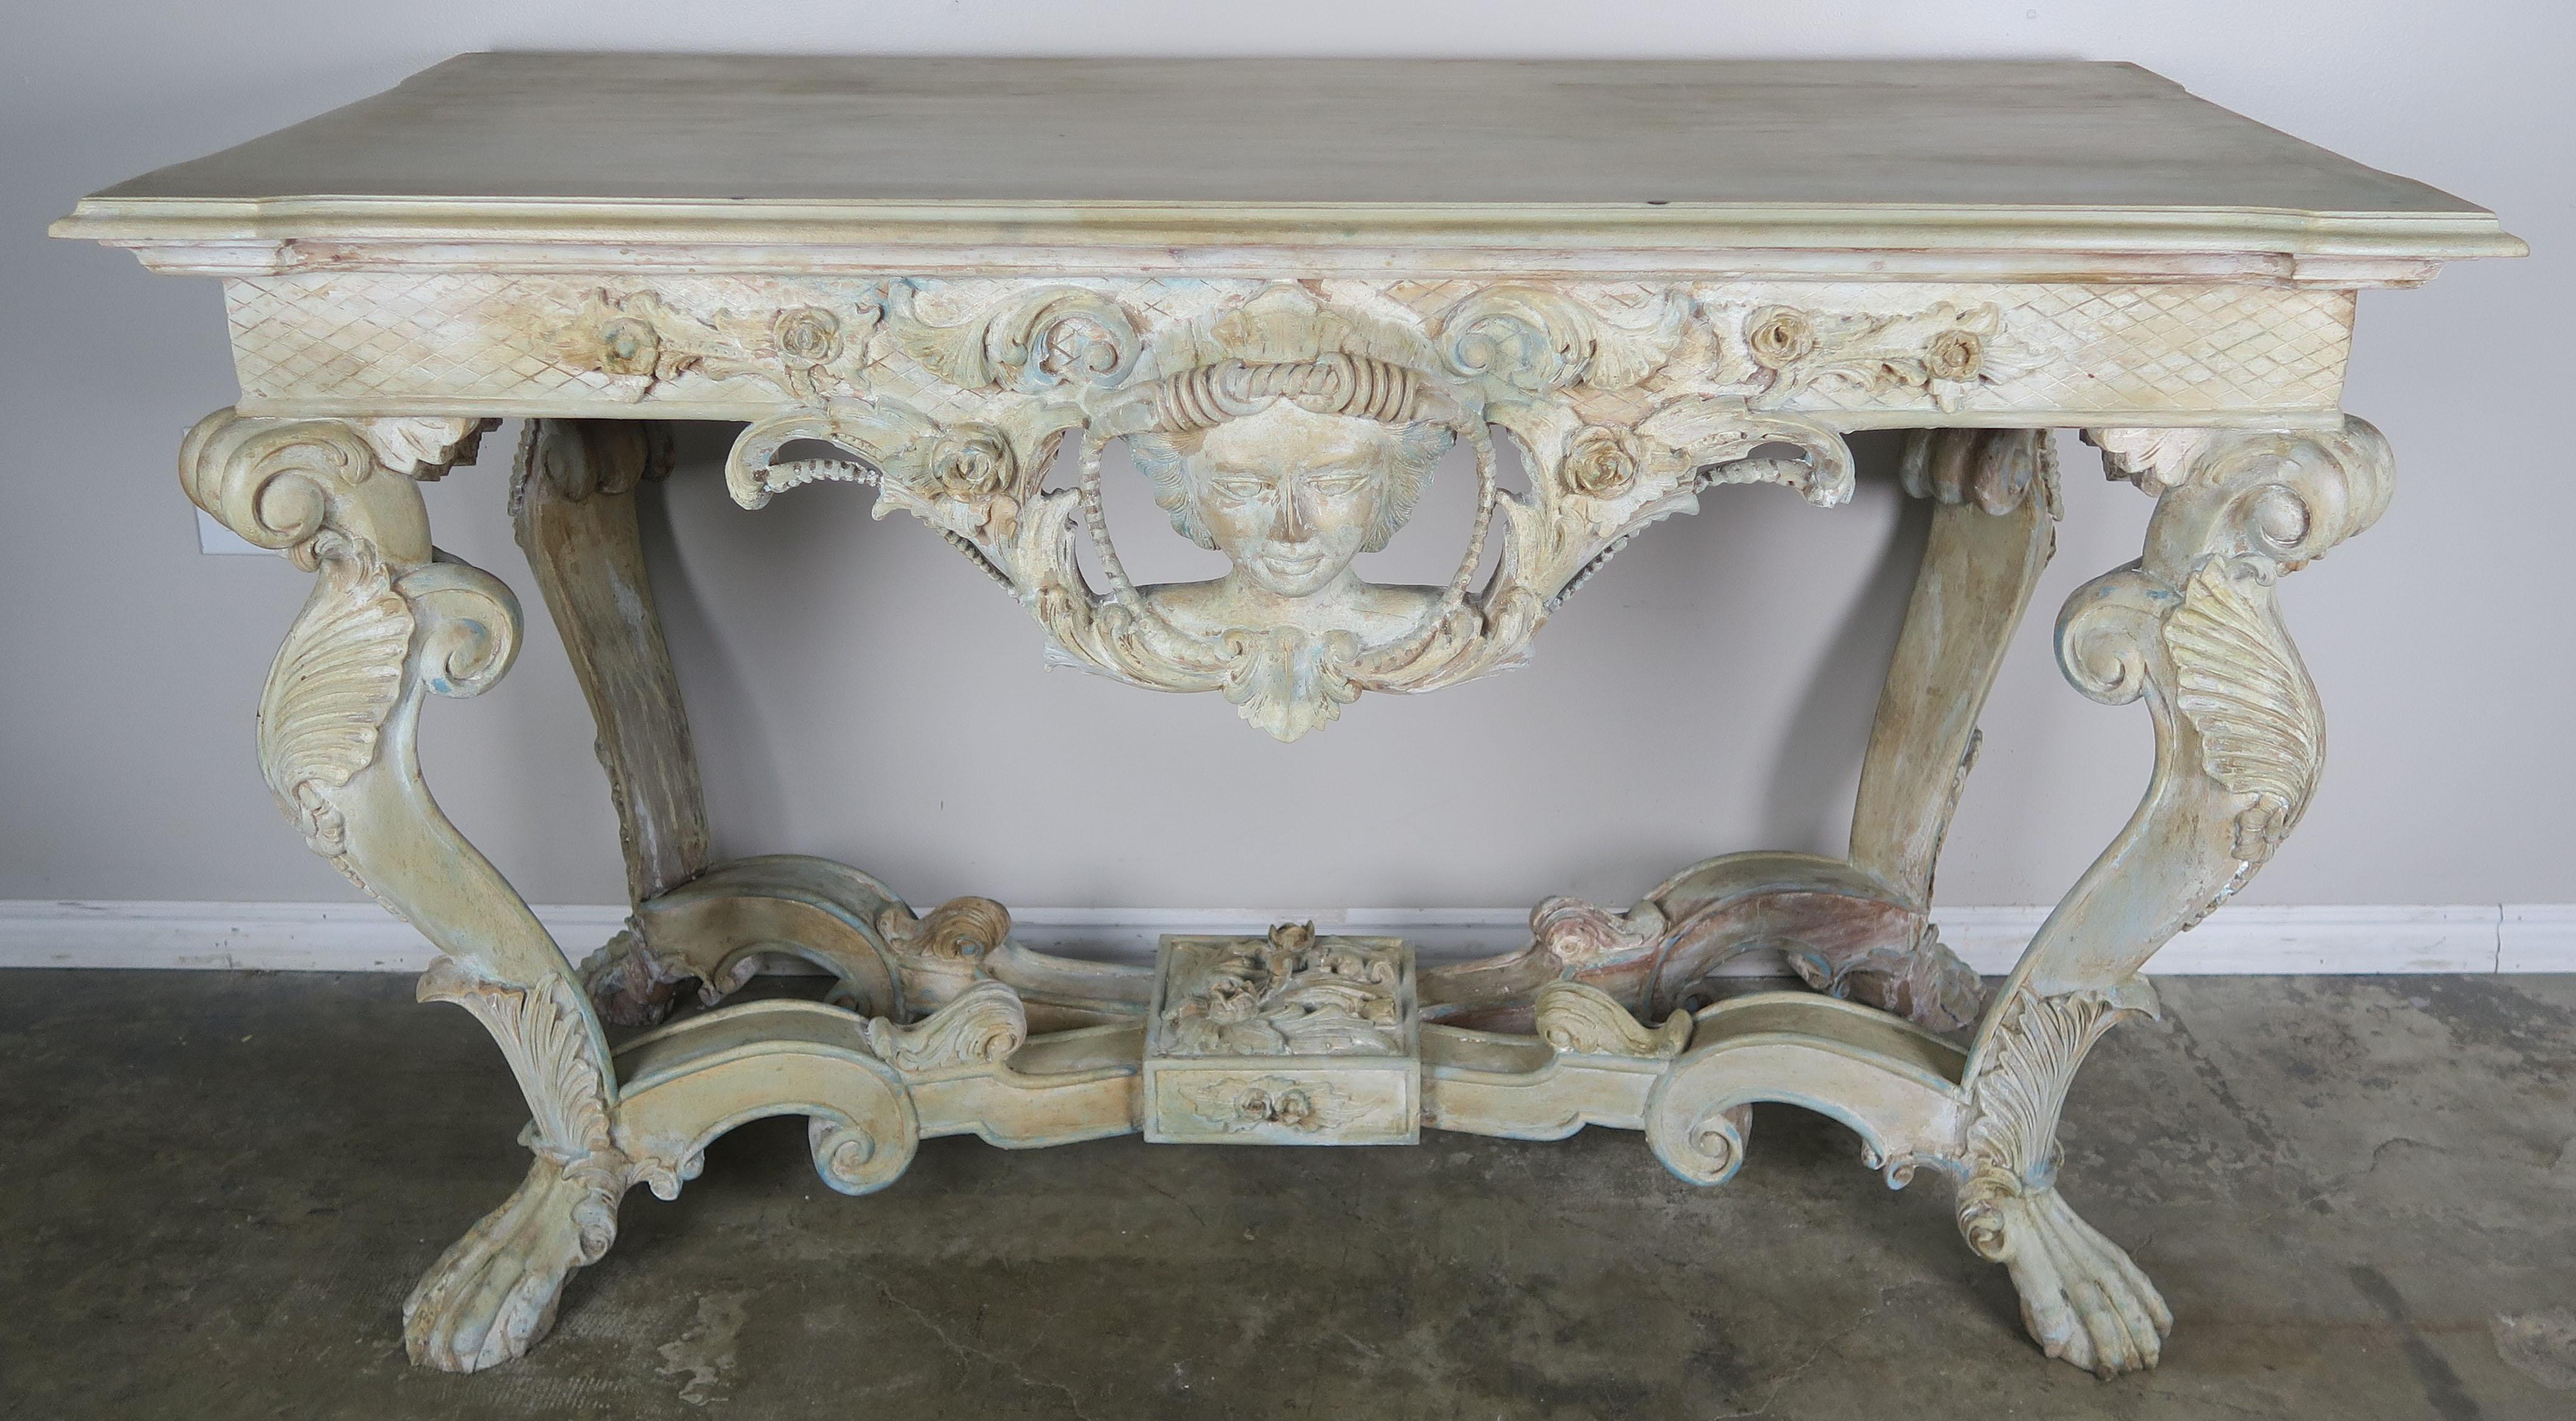 Early 1900s French carved softly hand painted console table with intricate carved detail of woman's face, shells, acanthus leaves, flowers, scrolls, and so much more. The finish is painted in soft muted colors that include a cream base with accents